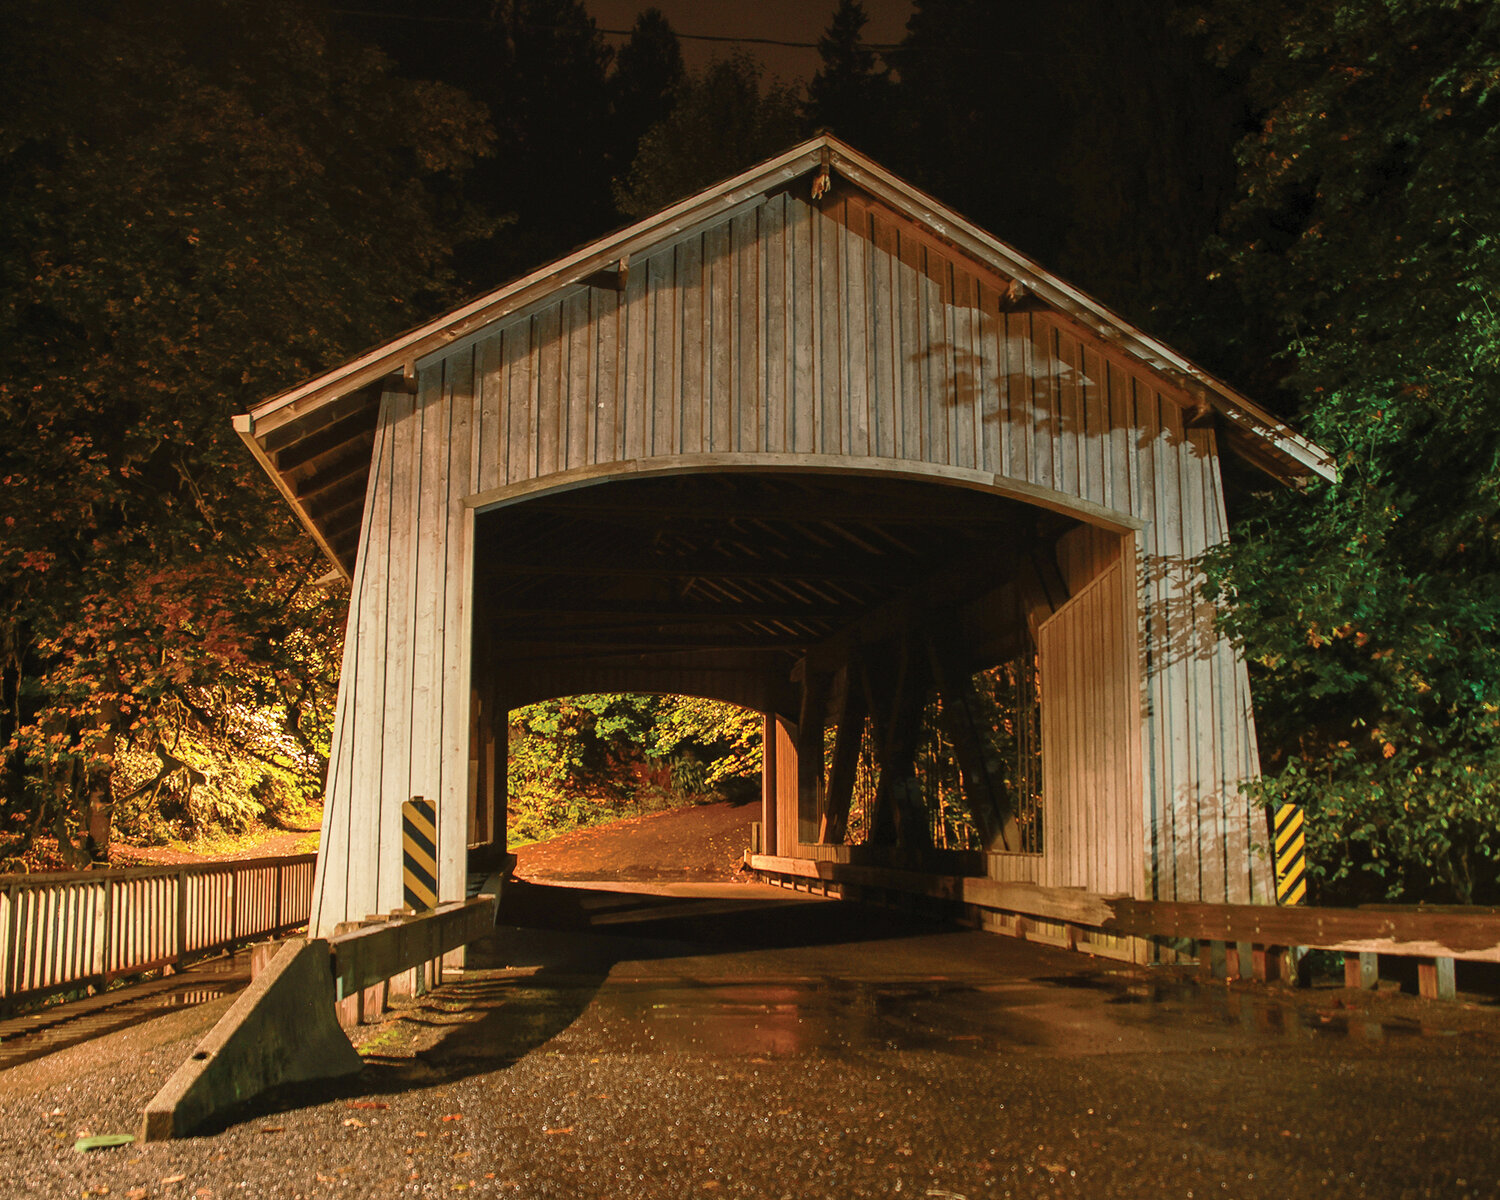 The Cedar Creek Grist Mill and covered bridge prior to Big River Paranormal’s investigation of the Cedar Creek Grist Mill from the night of Saturday, Oct. 14 to the early morning of Sunday, Oct. 15.